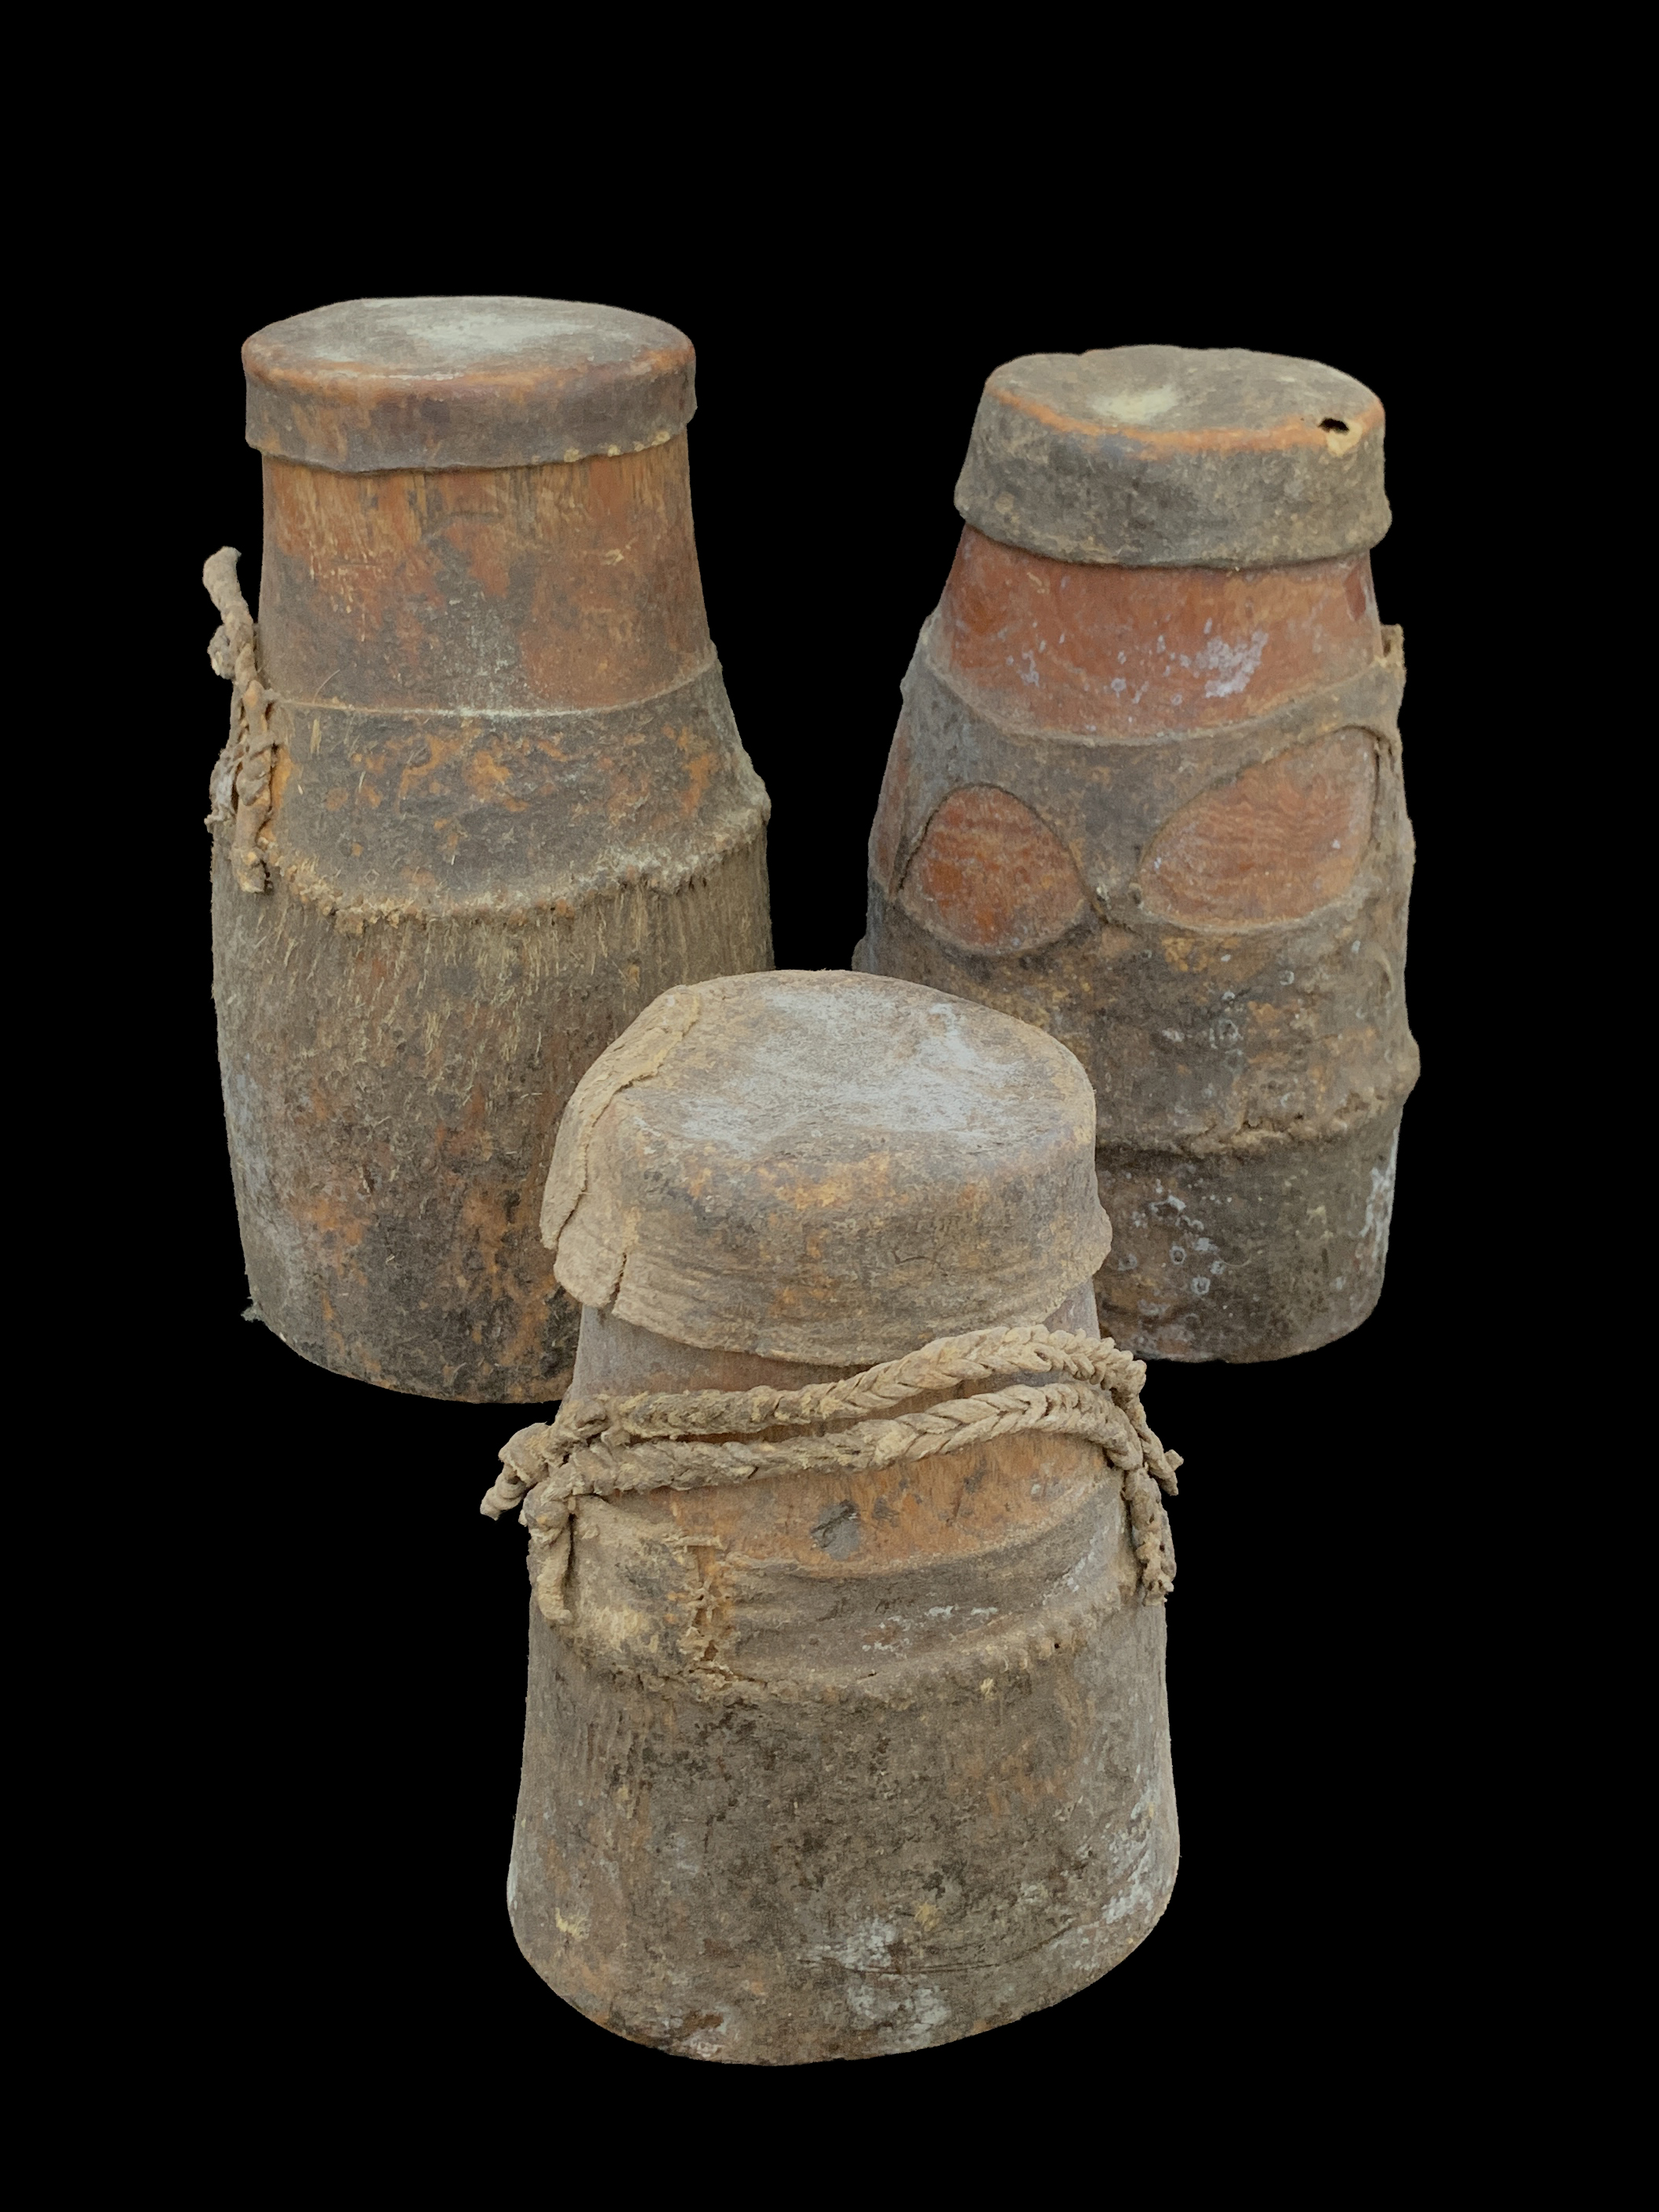 Set of 3 Meat Containers (3) - Pokot and Turkana People, Northern Kenya